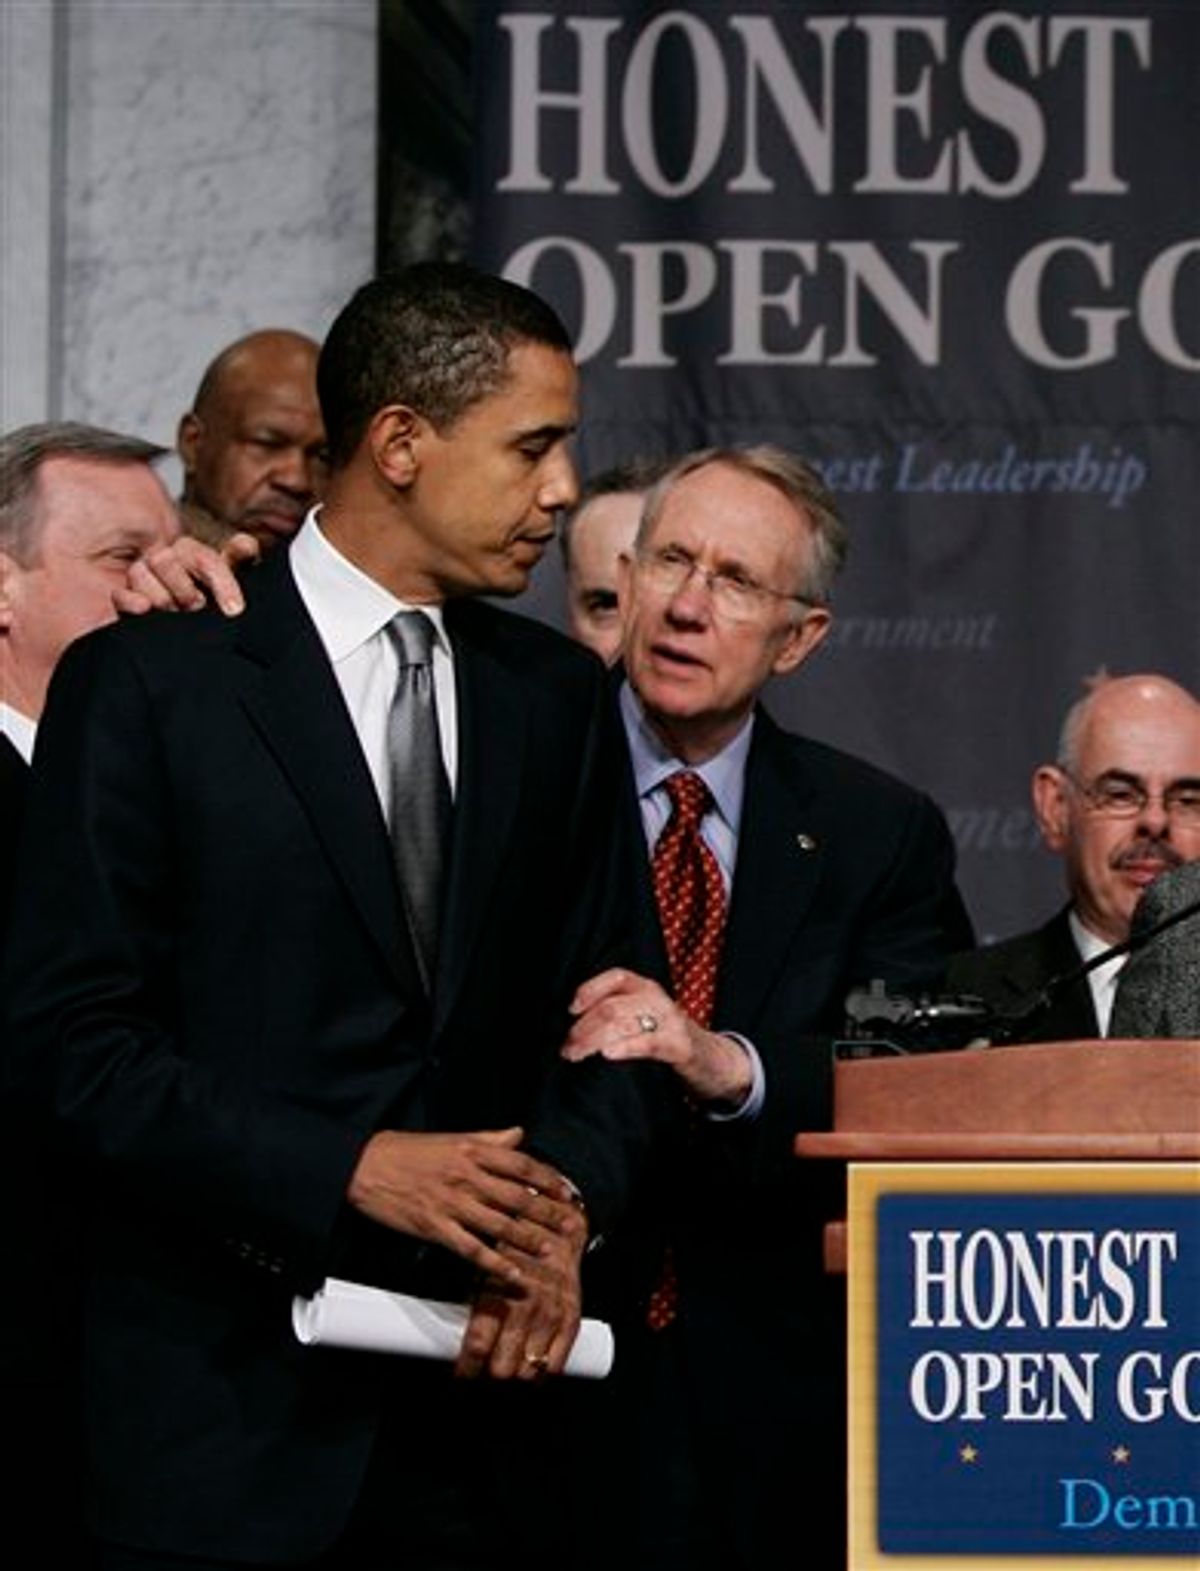 FILE - In this Jan. 18, 2006, file photo Senate Democratic Leader Harry Reid of Nev., center, joined by Sen. Barack Obama, D-Ill., left, prepares to outline the Democrat agenda for reform in the wake of the scandal involving former lobbyist Jack Abramoff, at the Library of Congress in Washington.  Reid apologized Saturday, Jan. 9, 2010, to President Barack Obama  for comments he made about Obama's race during the 2008 presidential bid, which are quoted in a yet-to-be-released book about the campaign titled "Game Change". (AP Photo/J. Scott Applewhite, File)  (AP)